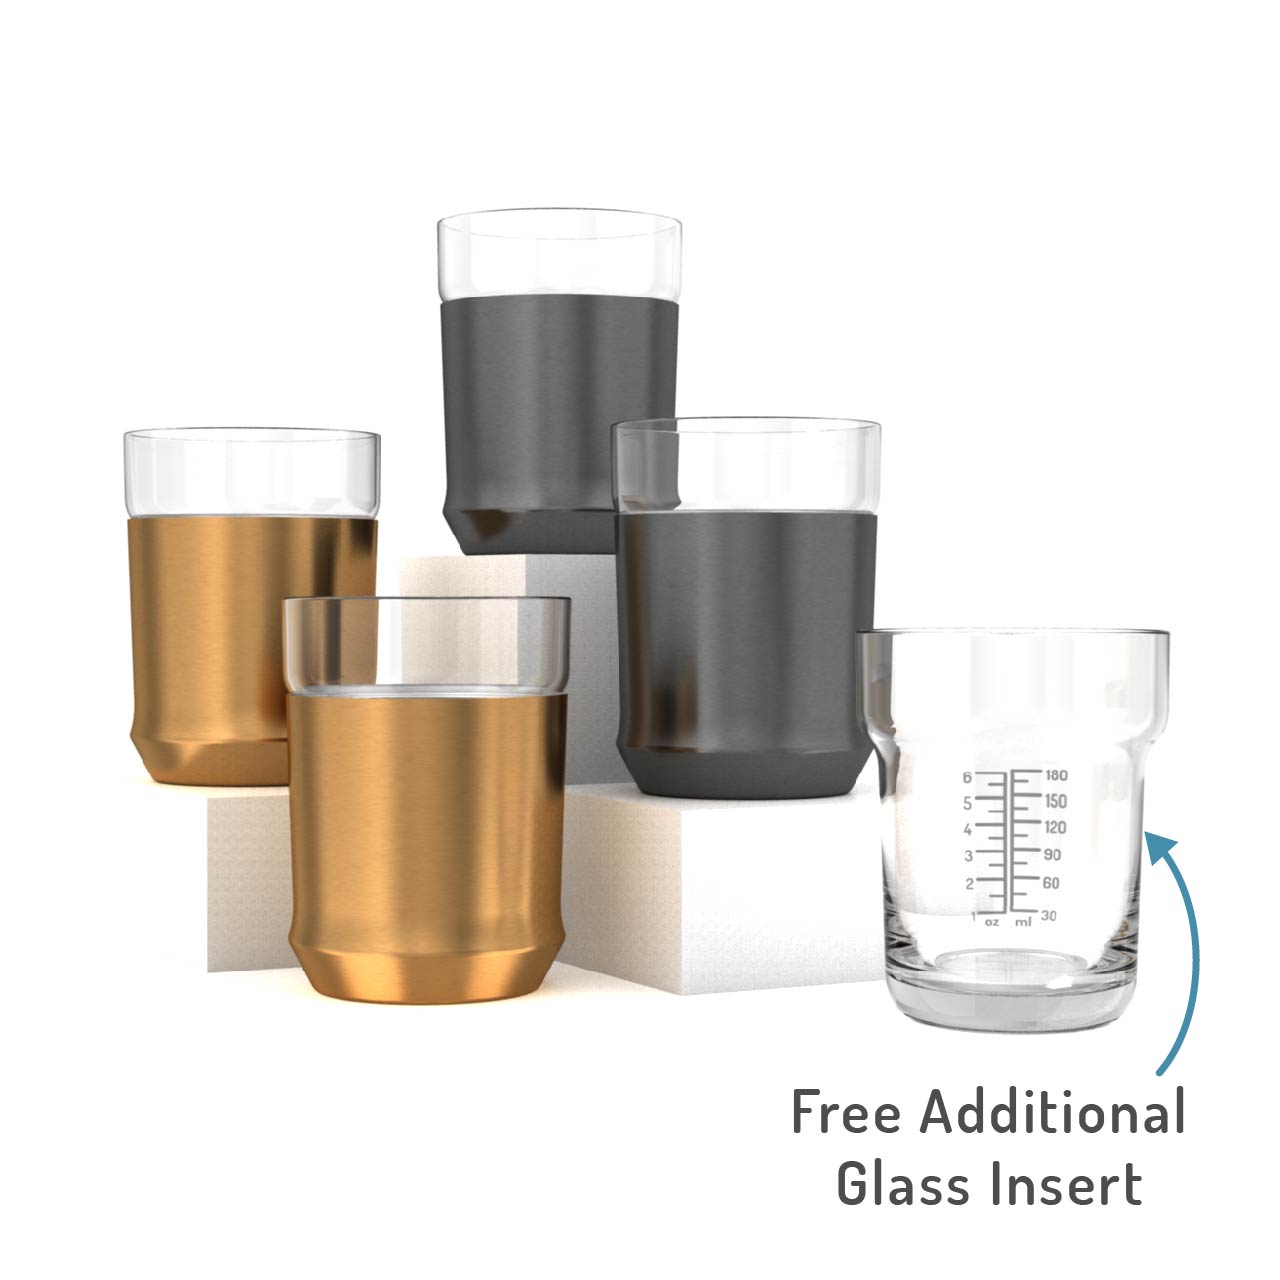  Elevated Craft Hybrid Cocktail Shaker + Hybrid Cocktail Glass -  Home Bar Essential Bundle - Premium Vaccum Insulated Cocktail & Steel Base  with Removable Glass Insert, Innovative Measuring System: Home & Kitchen